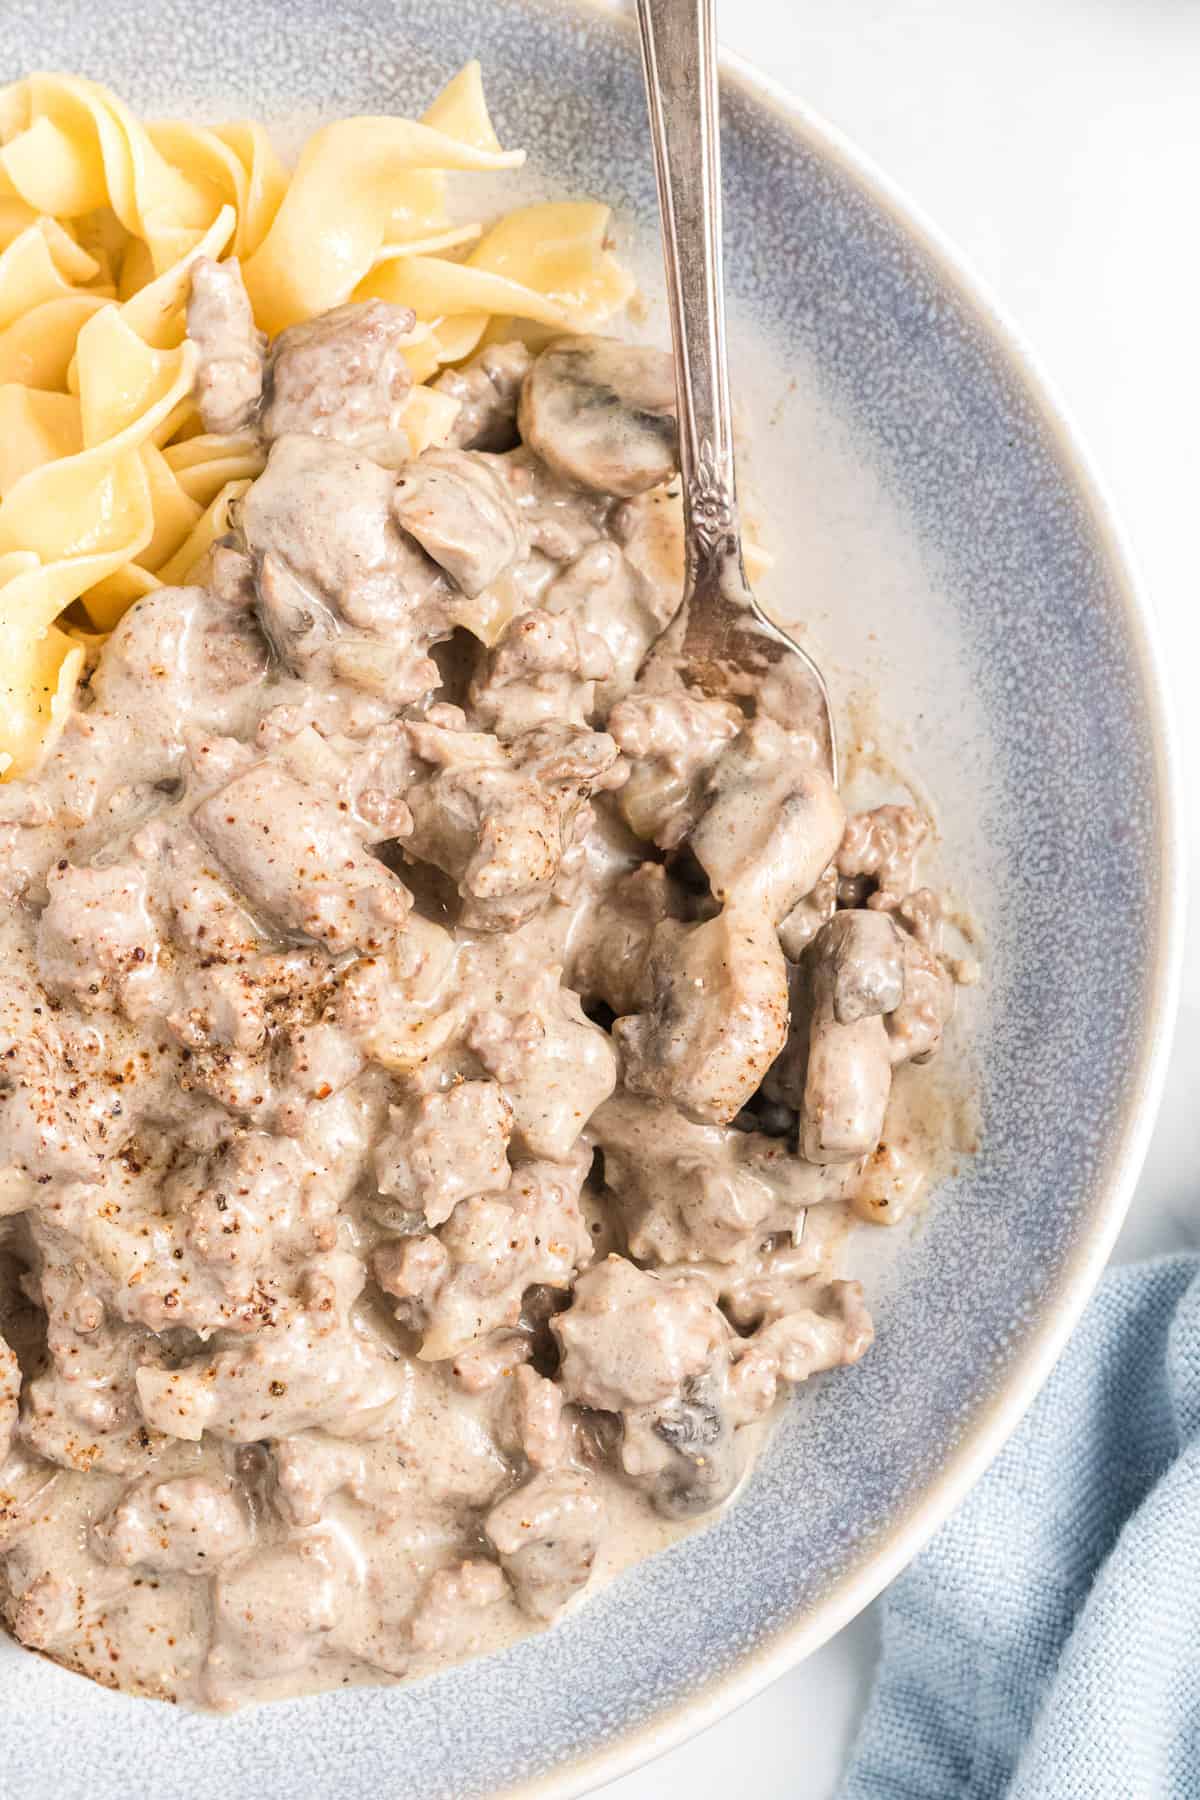 This is an image of ground beef stroganoff from Amy of House Of Nash Eats.